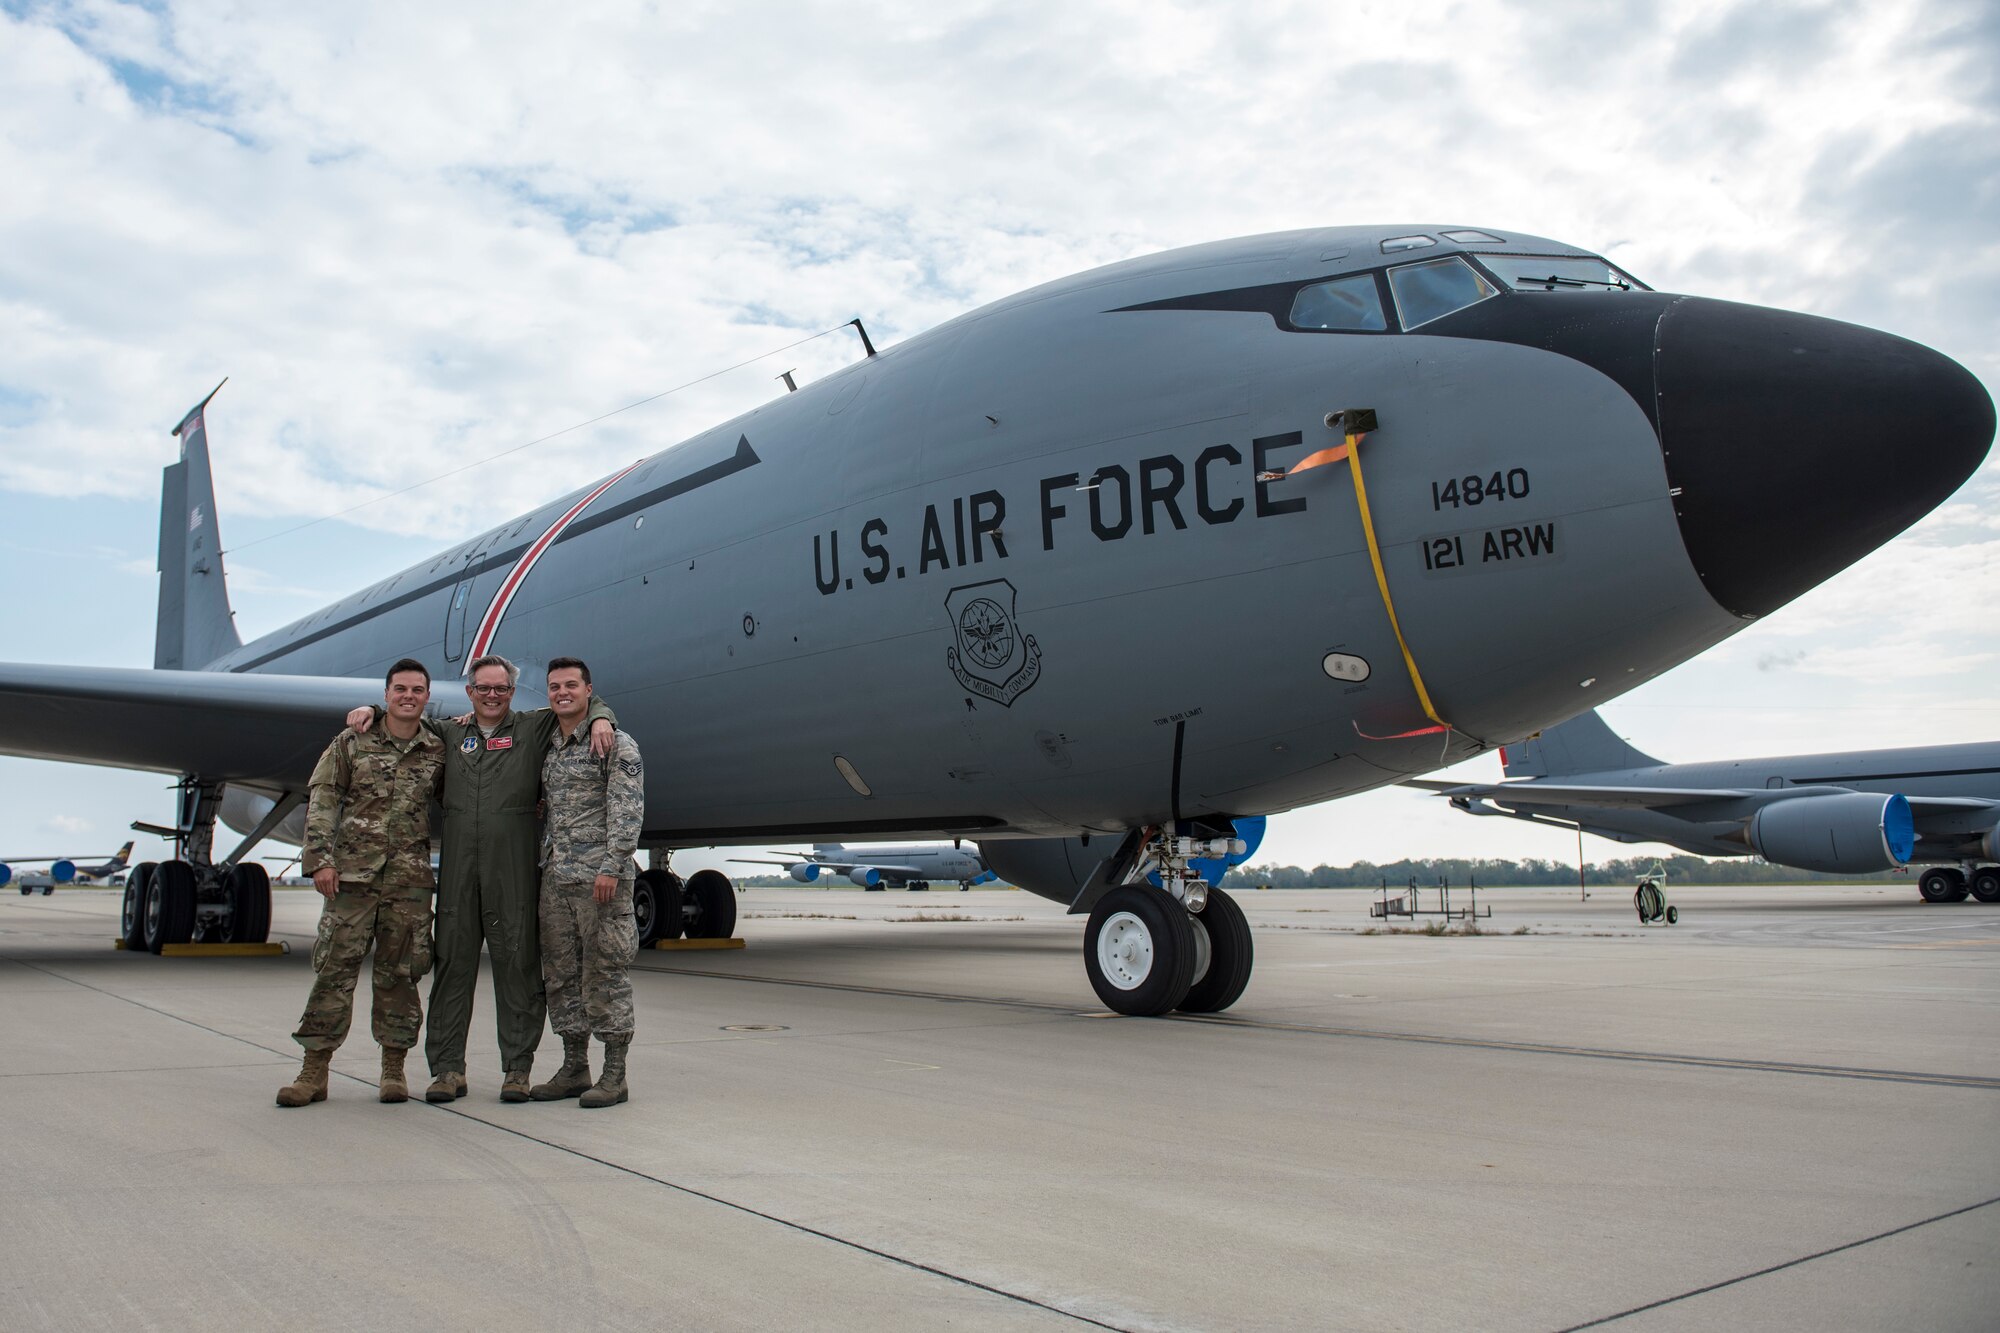 U.S. Air National Guard Lt. Col. Scott Notestine, a pilot with the 166th Air Refueling Squadron, 121st Air Refueling Wing, and Staff Sgt. Cody Notestine and Staff Sgt. Nick Notestine, aircraft metals technology specialists with the 121st Maintenance Squadron, 121st ARW, in front of a KC-135 Stratotanker on the flight line at Rickenbacker Air National Guard Base, Columbus, Ohio, Sep. 28, 2020. Lt. Col. Notestine retires Sep. 30 after 35 years of service, and his sons were recently selected to become pilots in the 121st ARW.